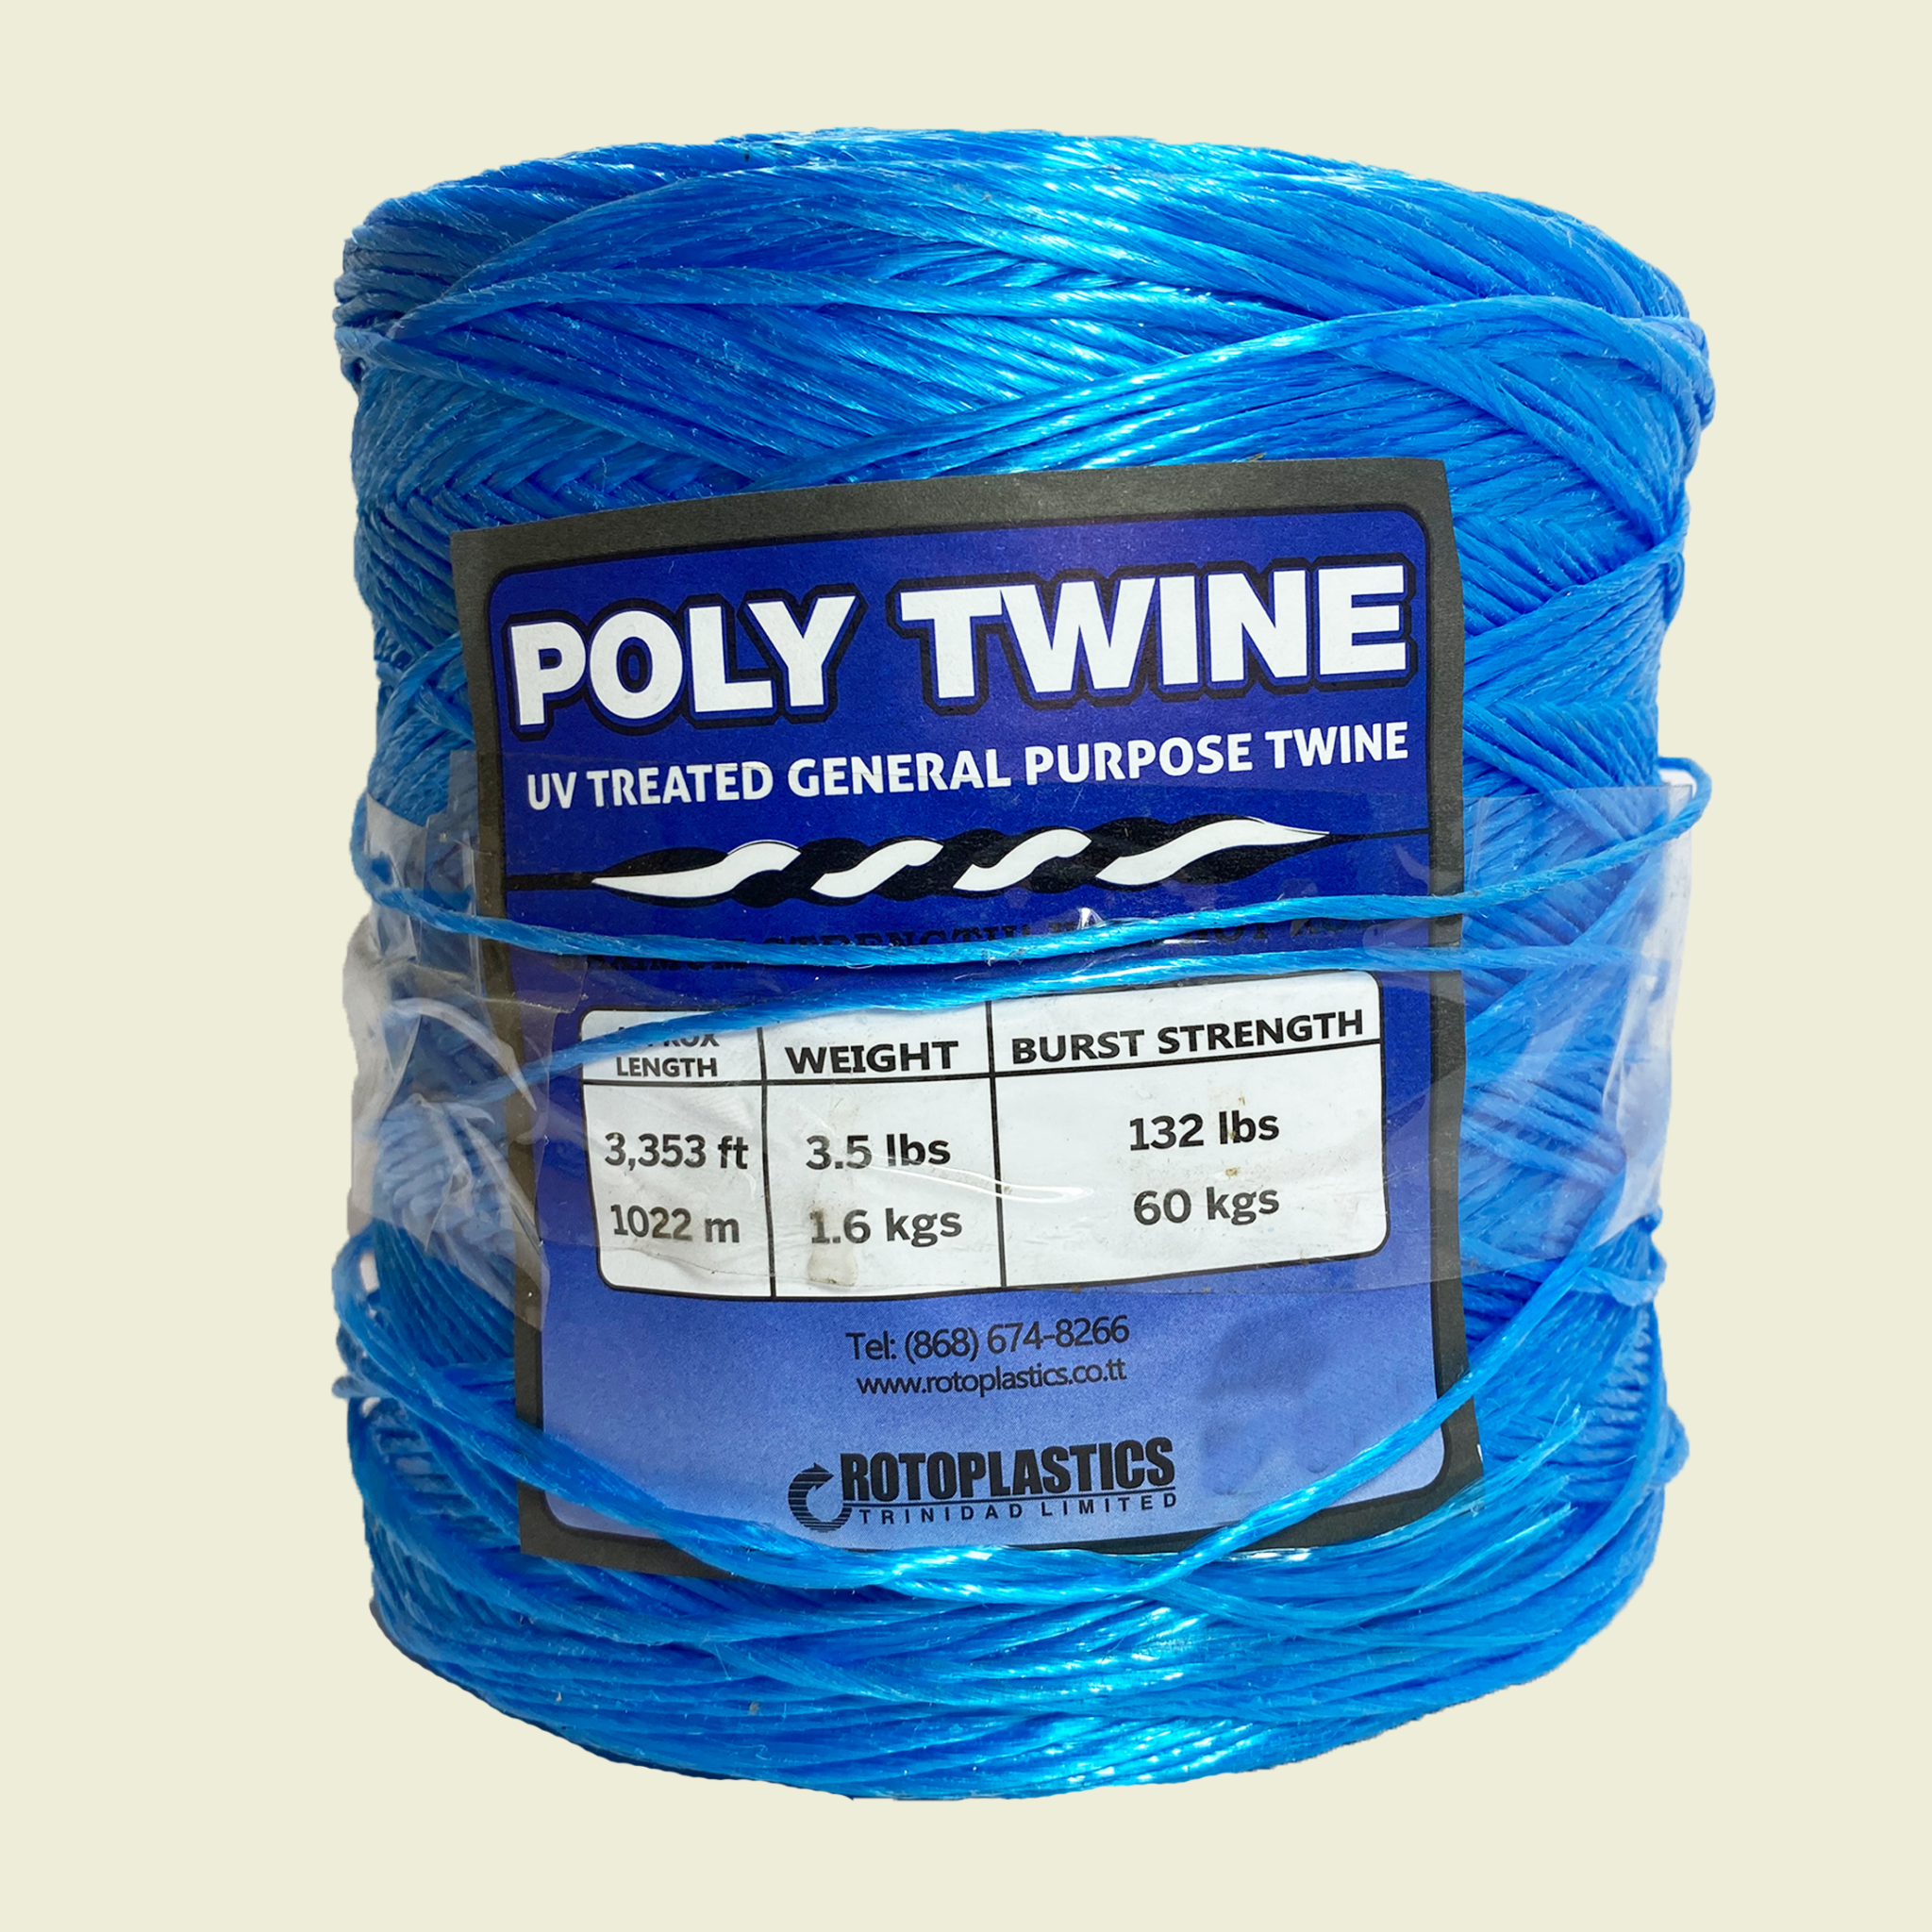 Best Twine for Binding and Wrapping Materials